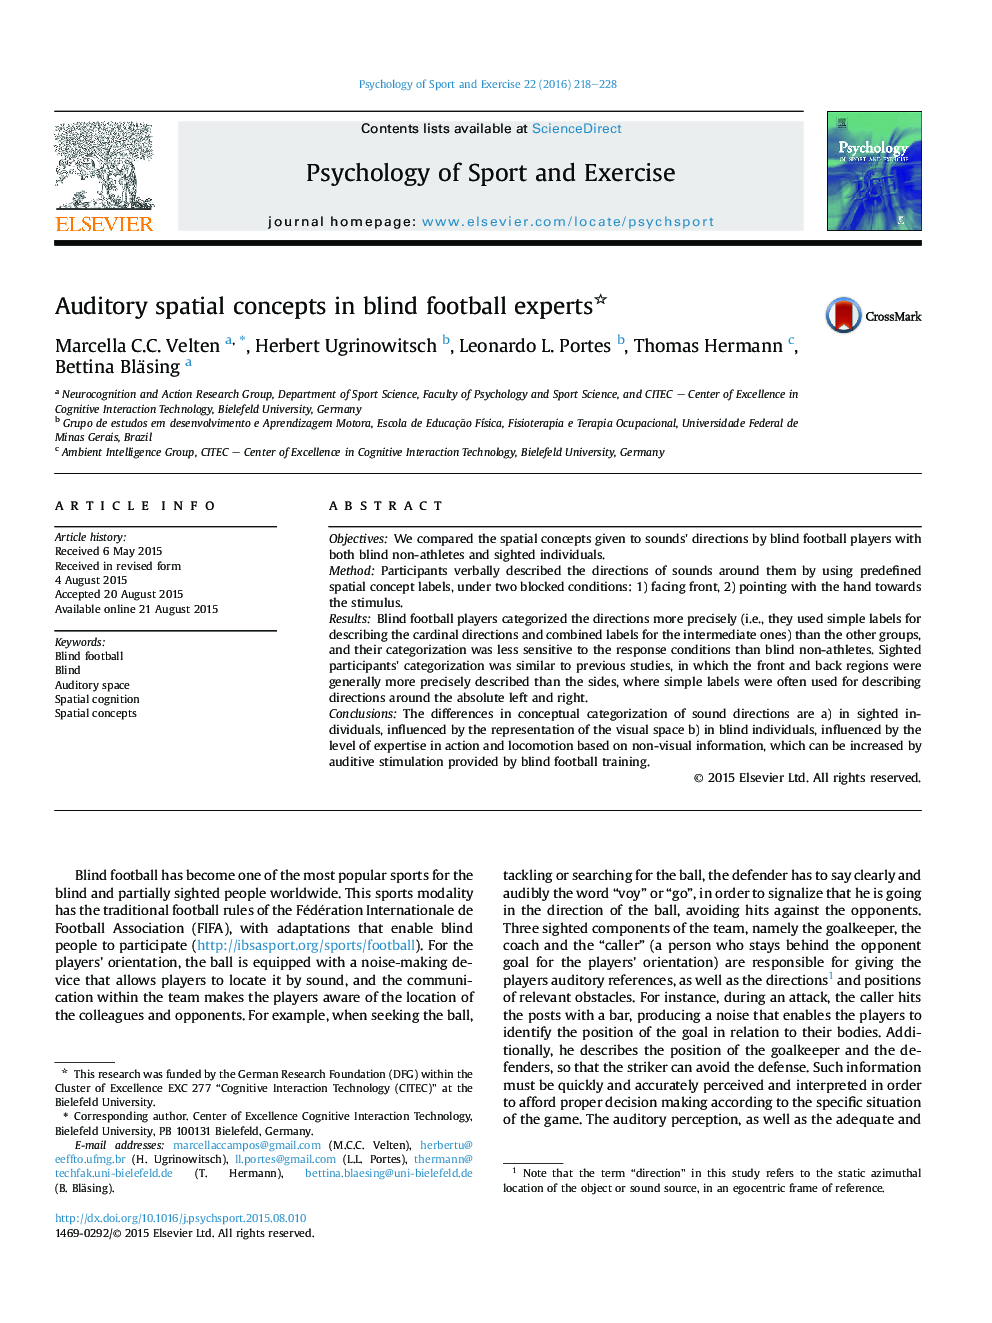 Auditory spatial concepts in blind football experts